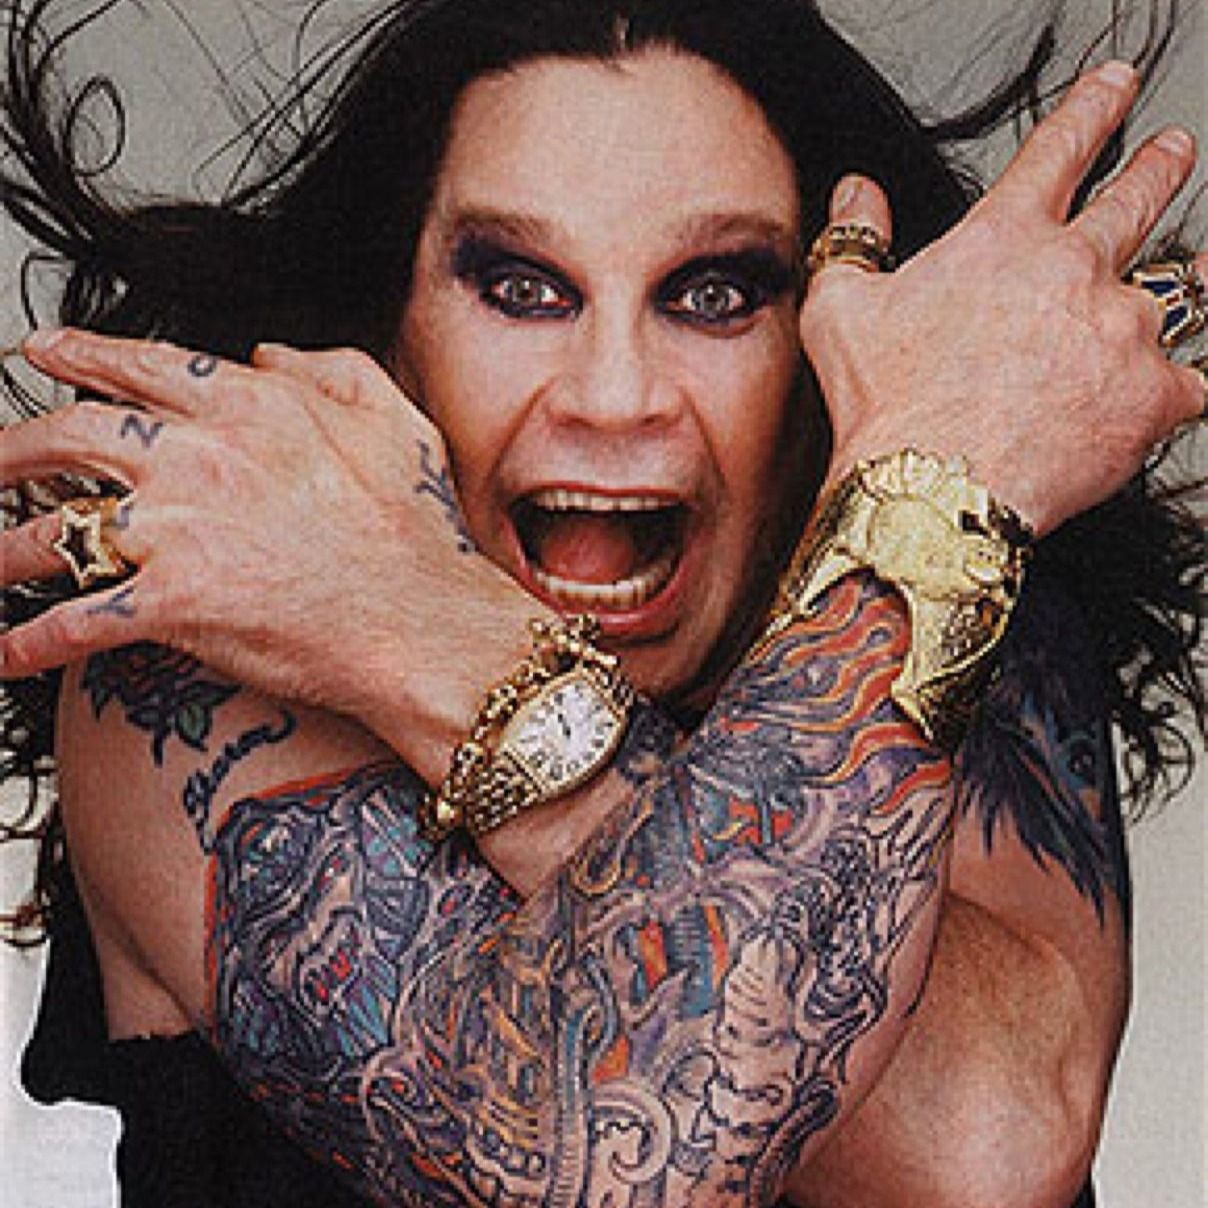 Ozzy tattoo after a day in the dishpit : r/kingcobrajfs